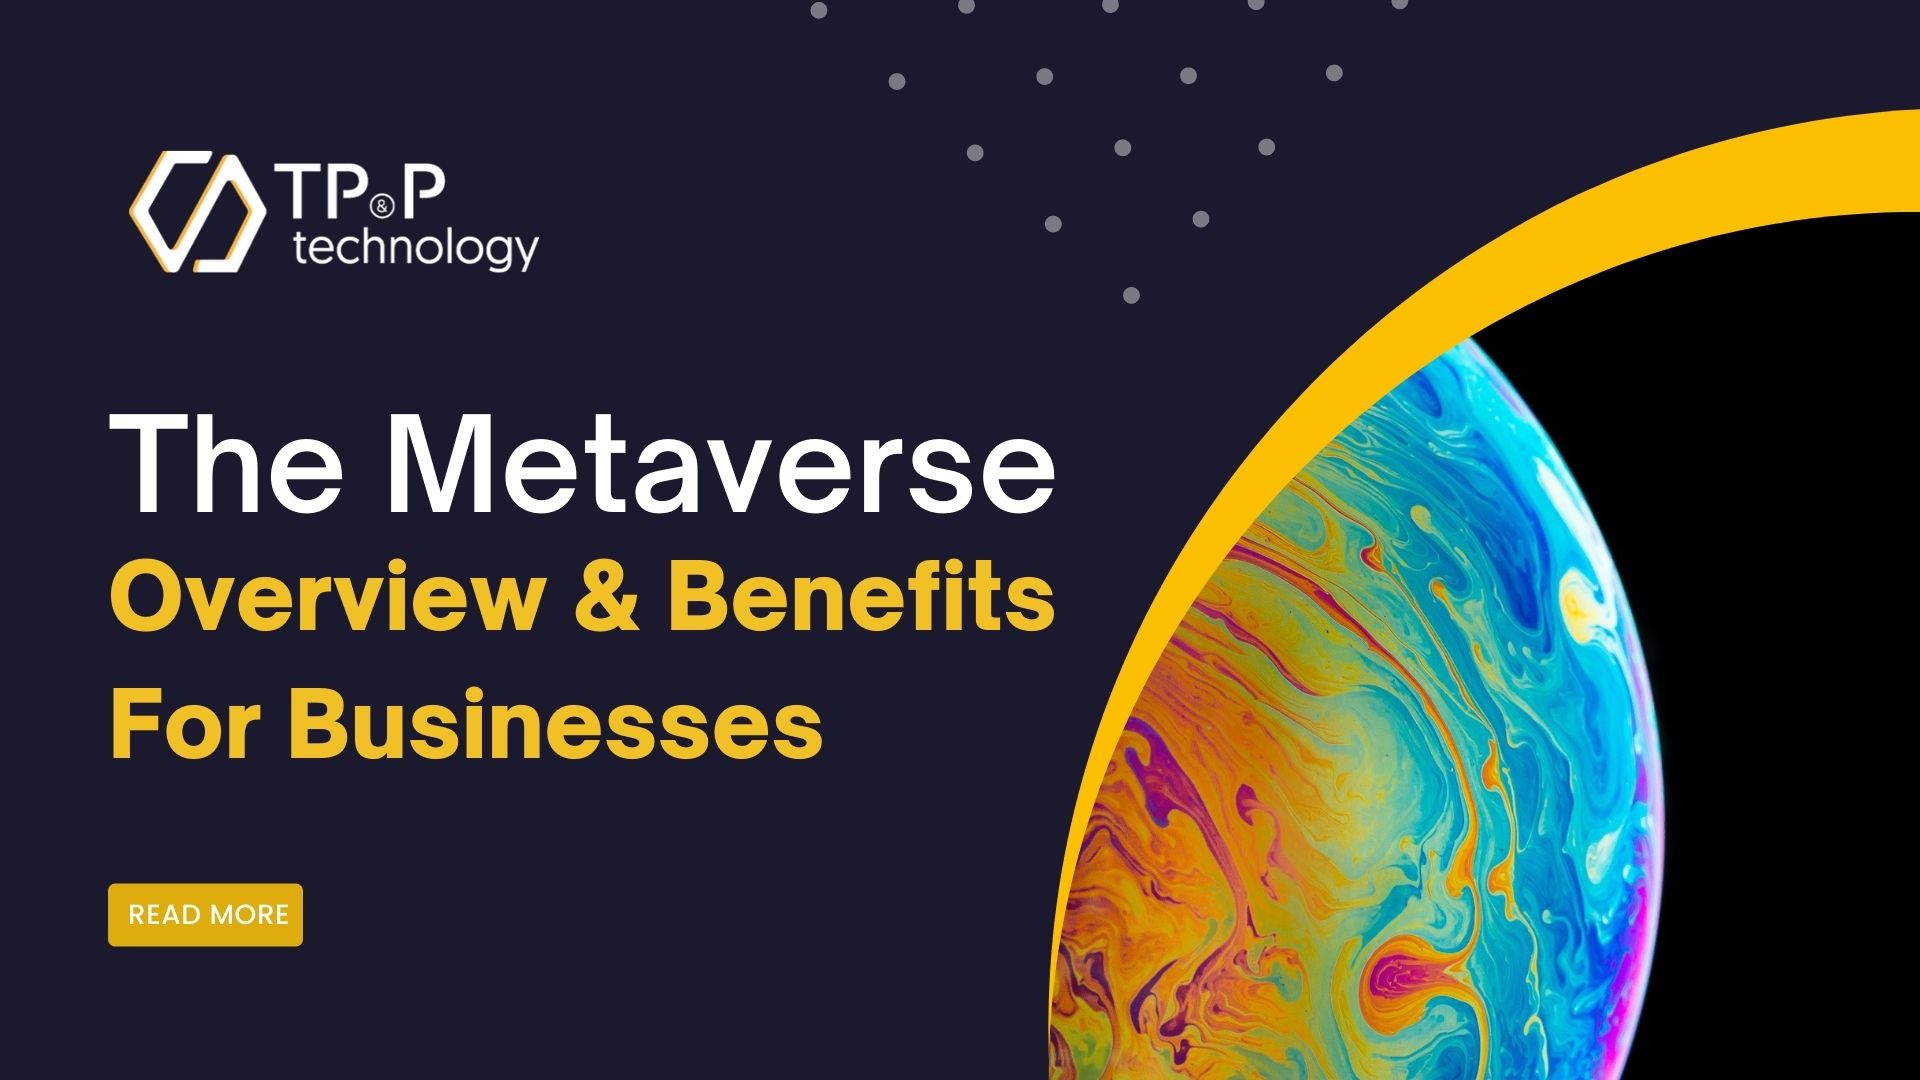 The Metaverse: Overview & Benefits For Businesses